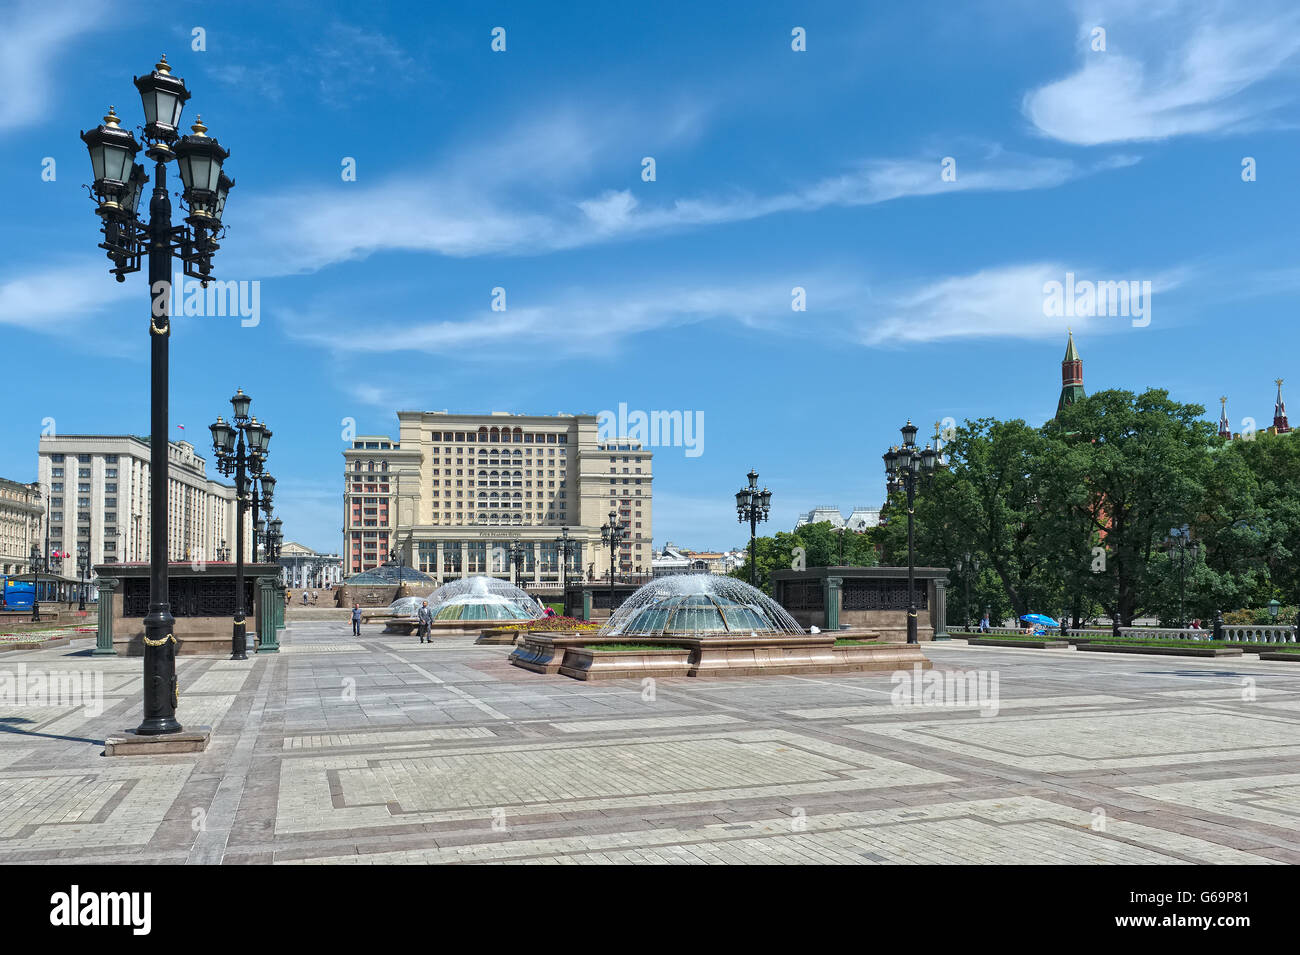 Moscow, Cityscape, Manezhnaya Square, View of the five-star hotel 'Four Seasons Hotel Moscow' Stock Photo